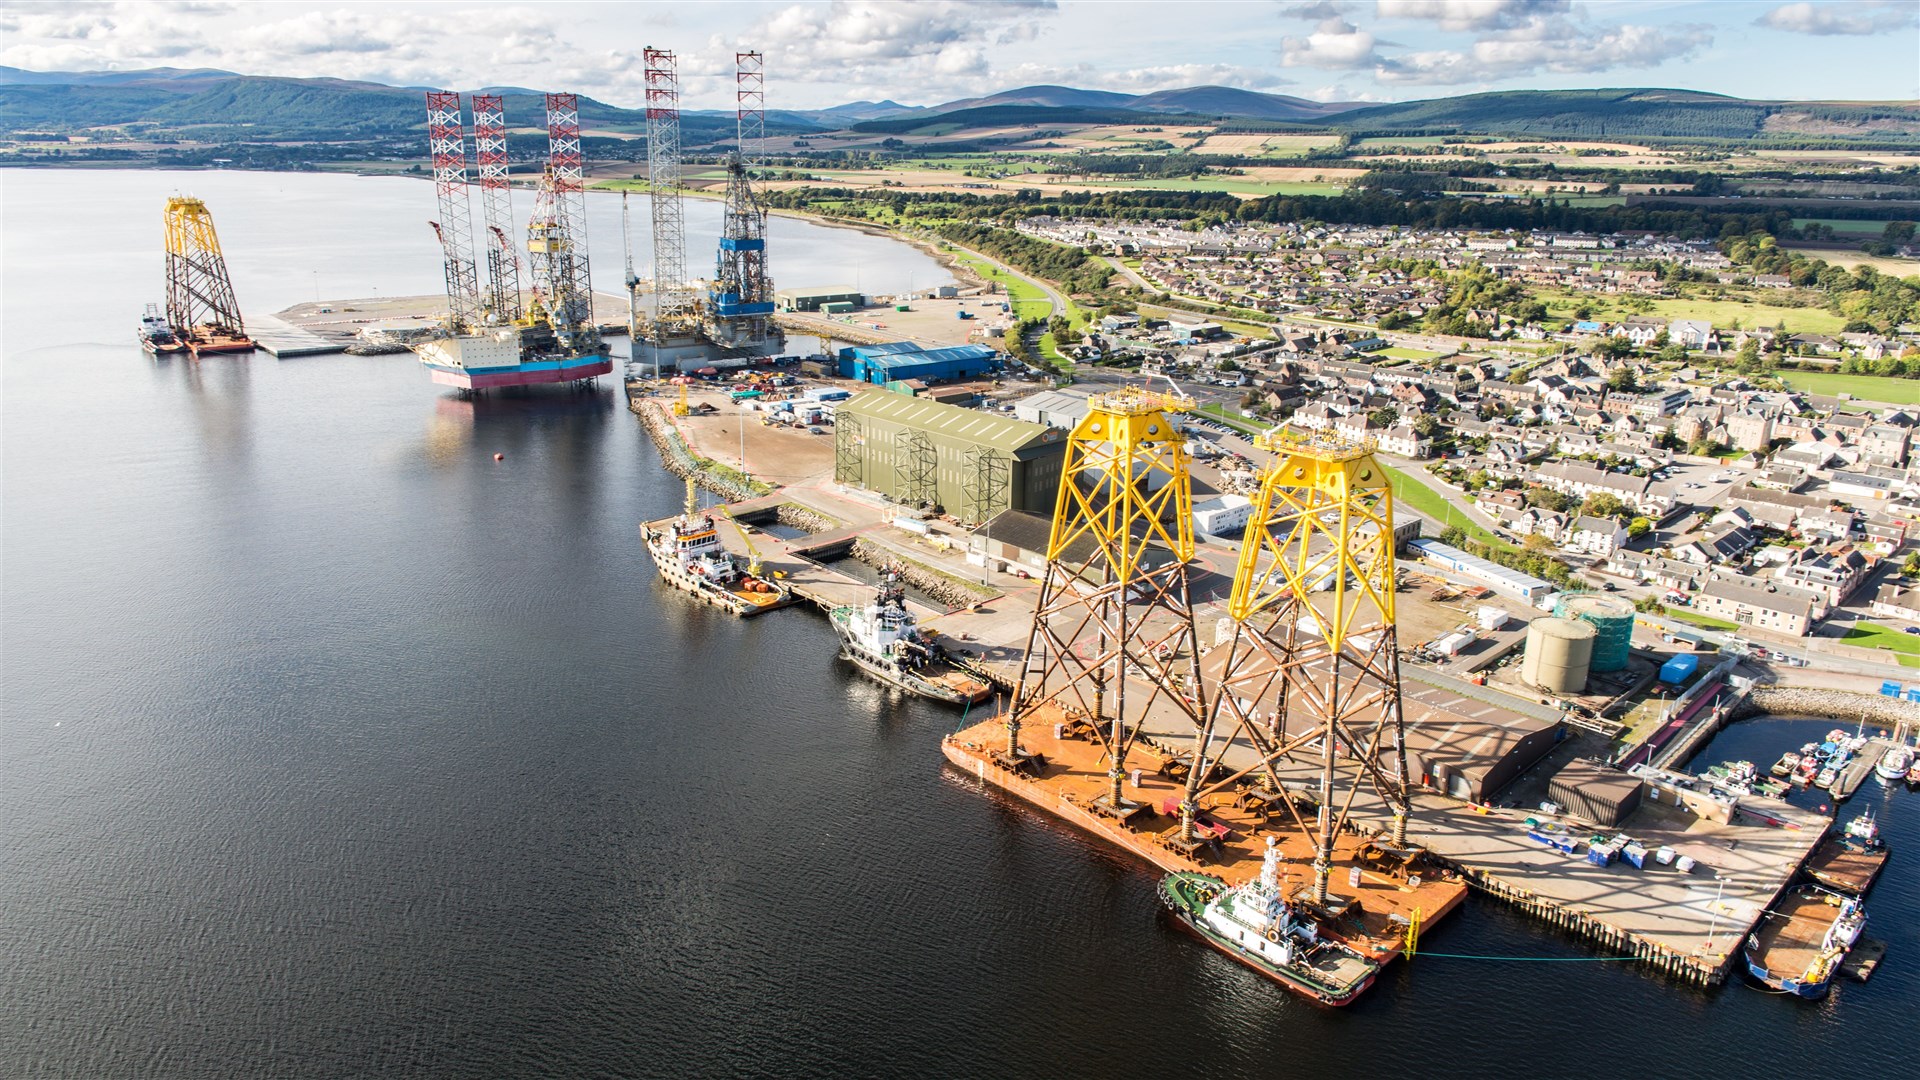 A study has found that the Cromarty Firth is best placed to house the UK’s largest hydrogen electrolyser.